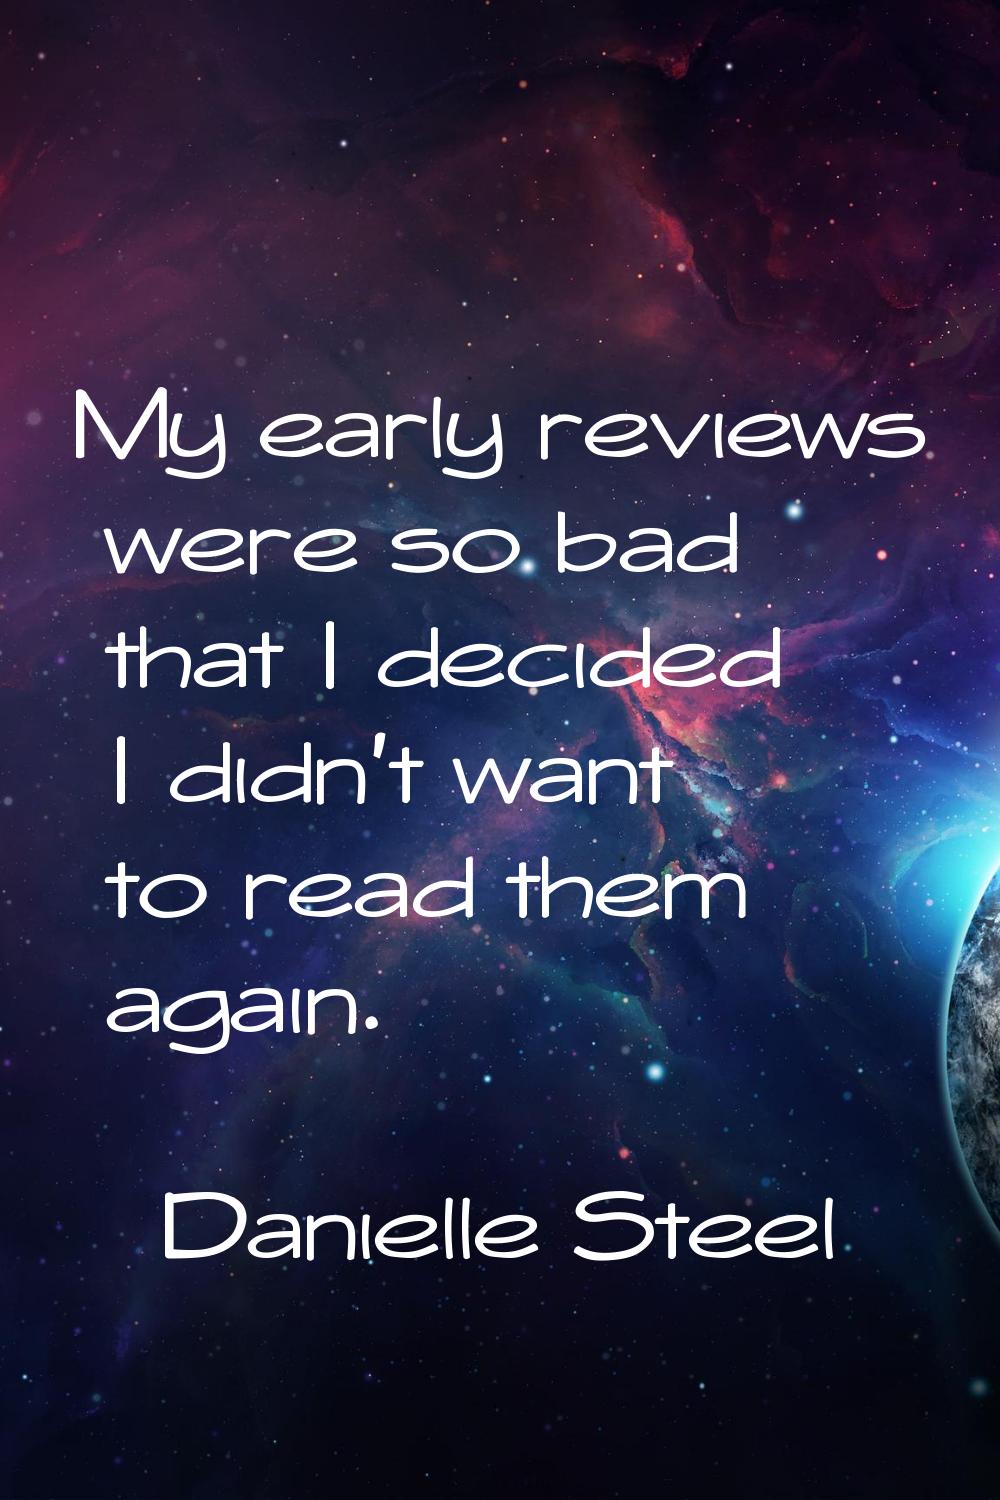 My early reviews were so bad that I decided I didn't want to read them again.